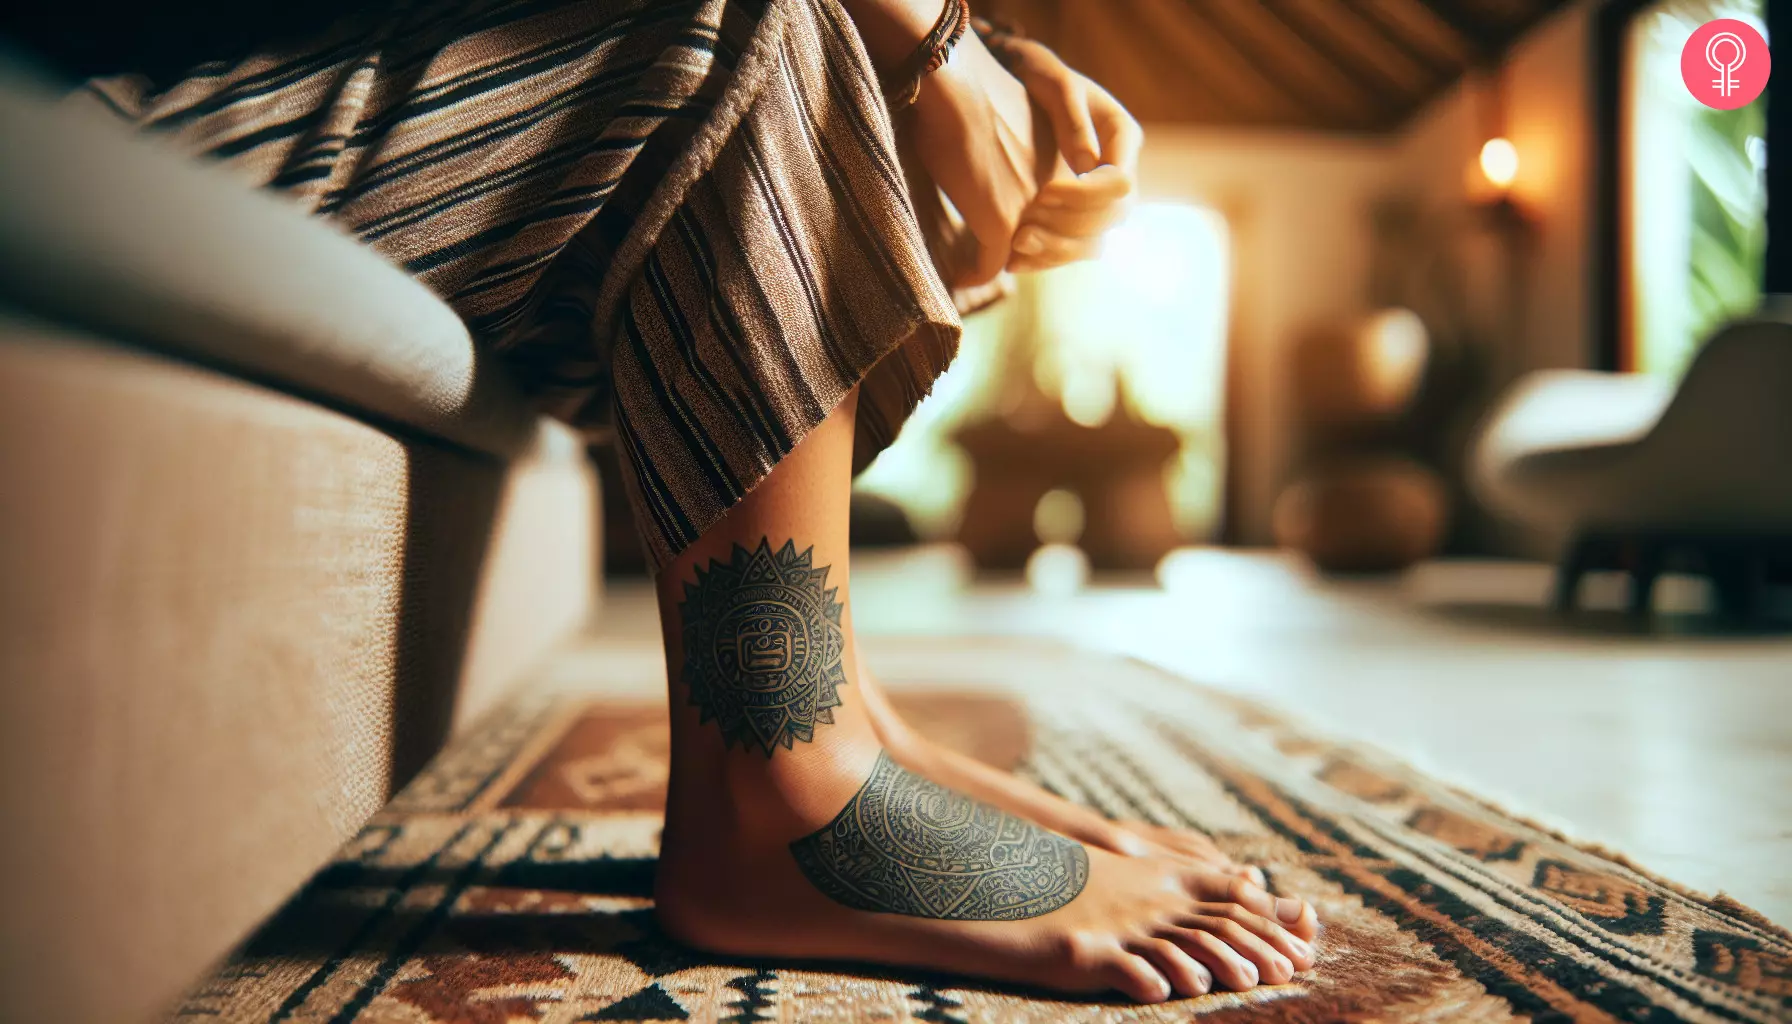 A Mayan sun symbol tattoo on a woman’s ankle